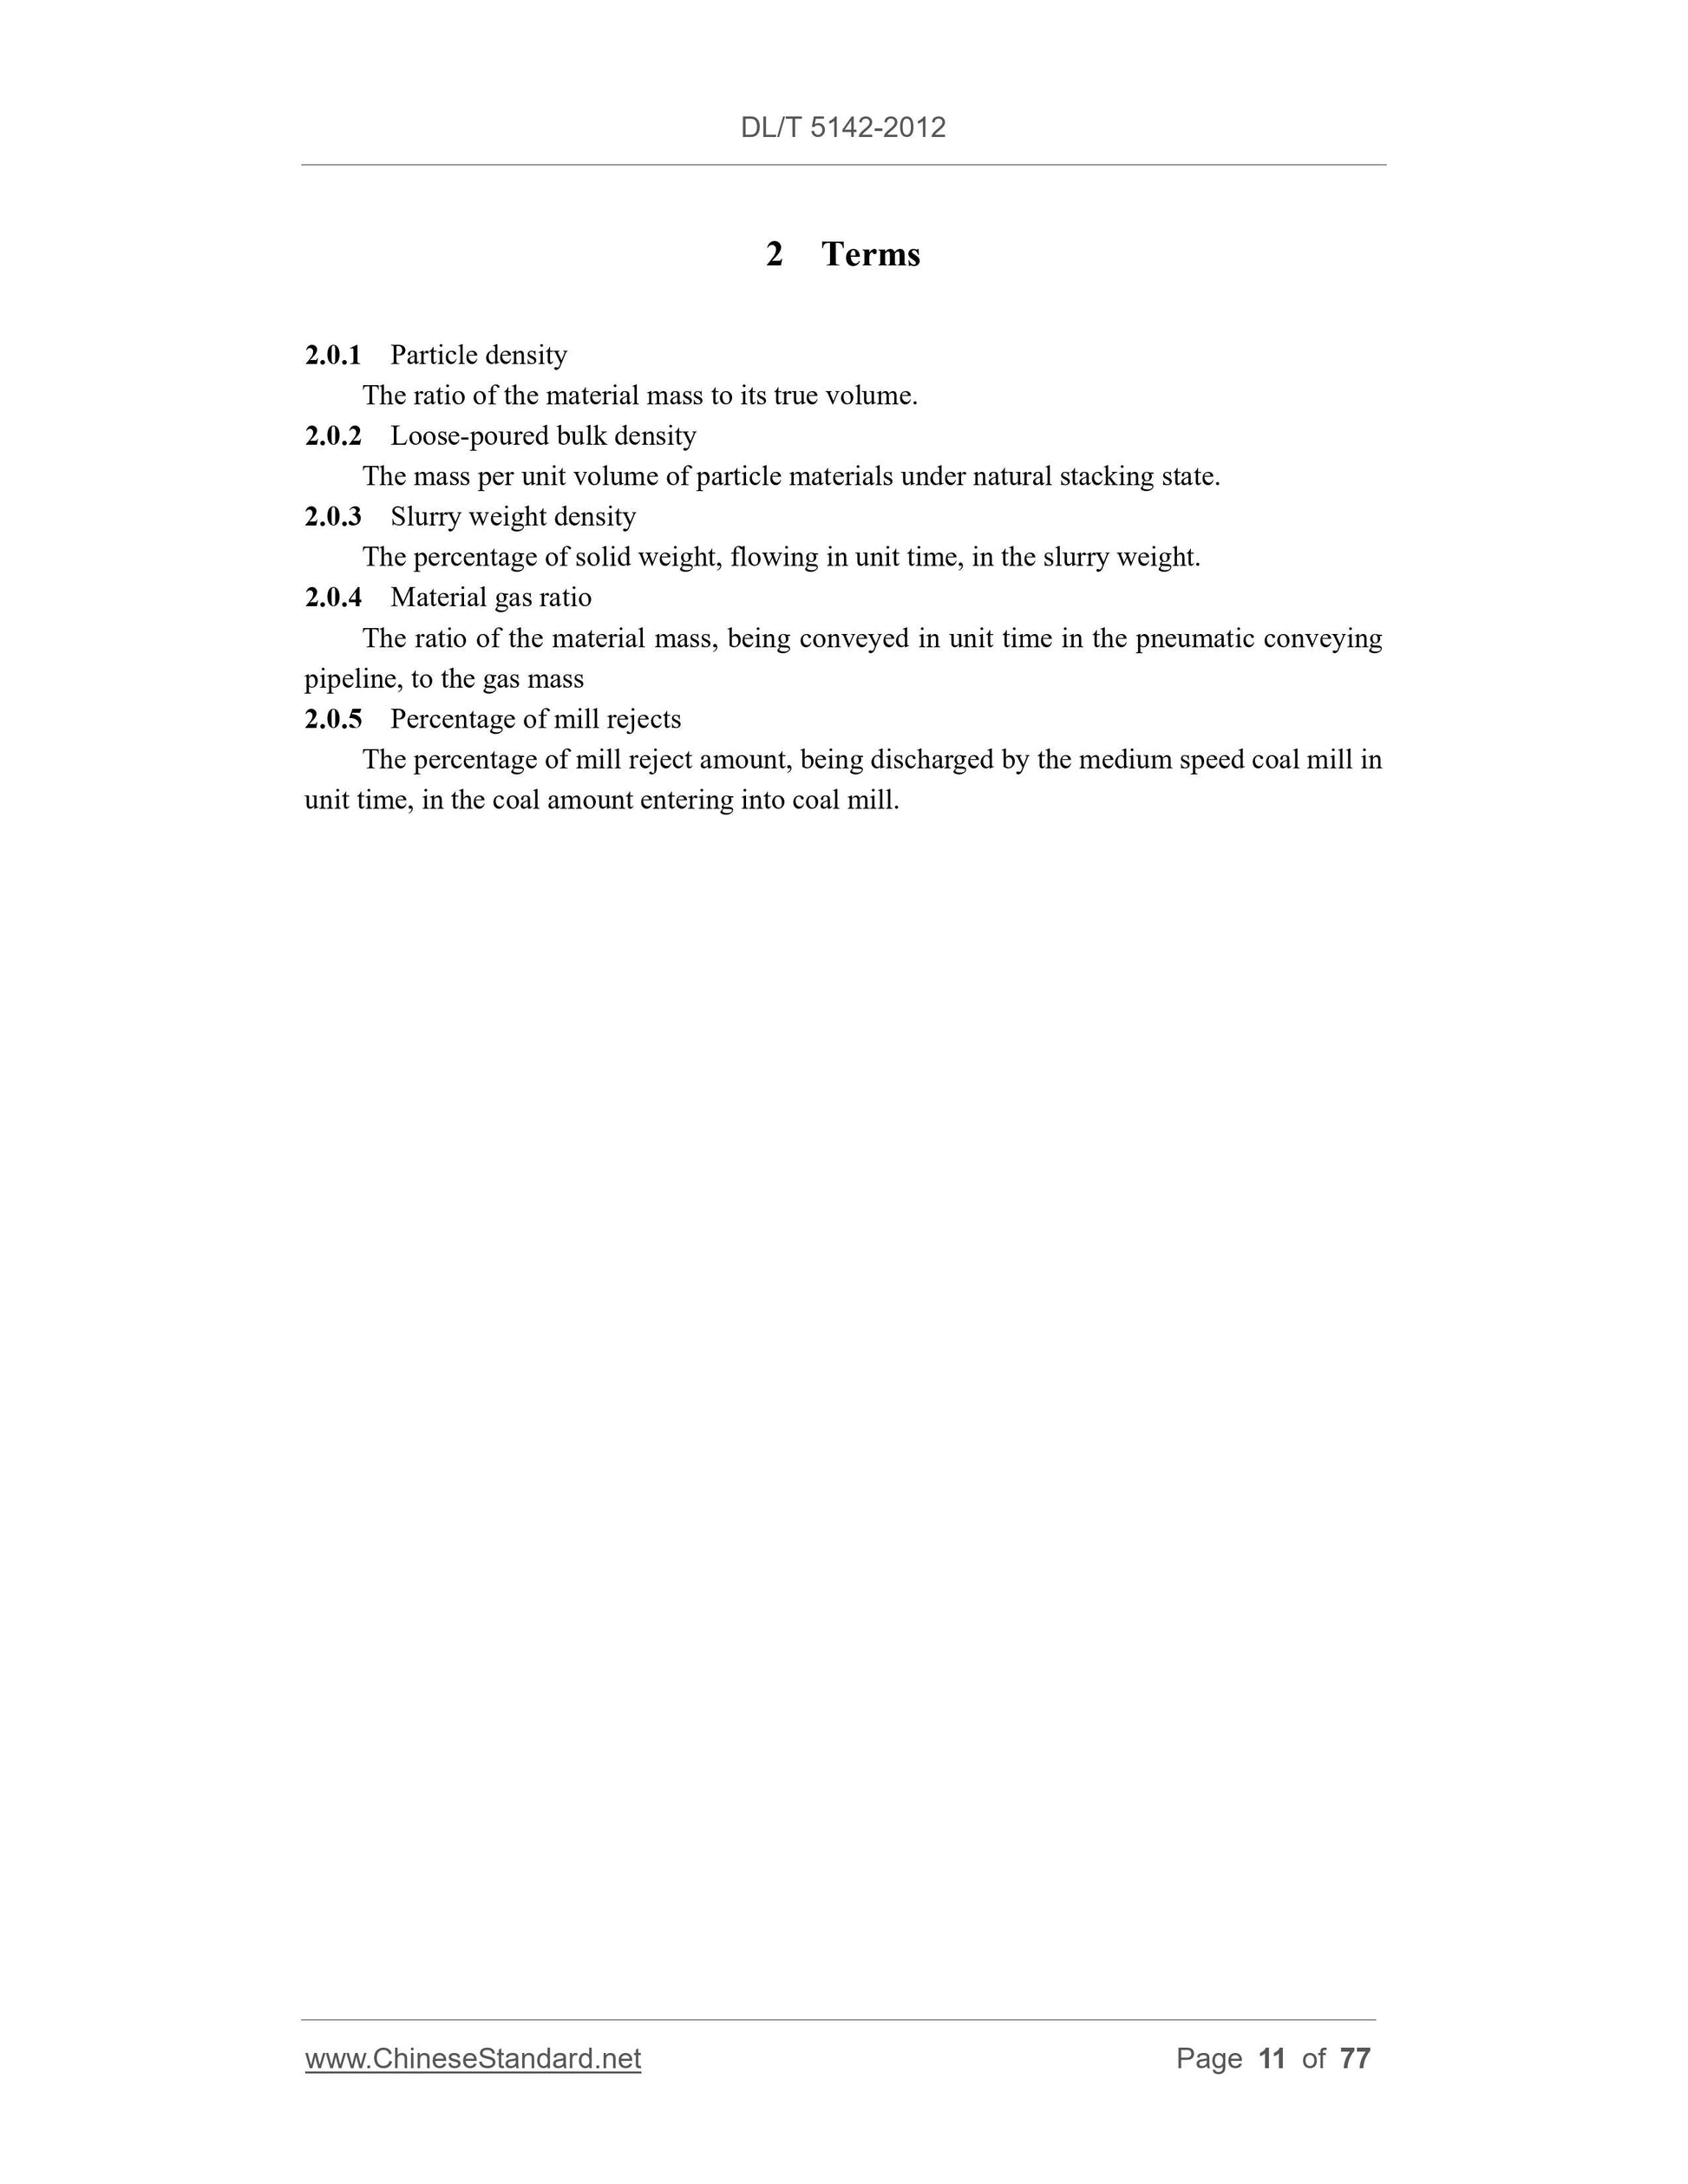 DL/T 5142-2012 Page 4